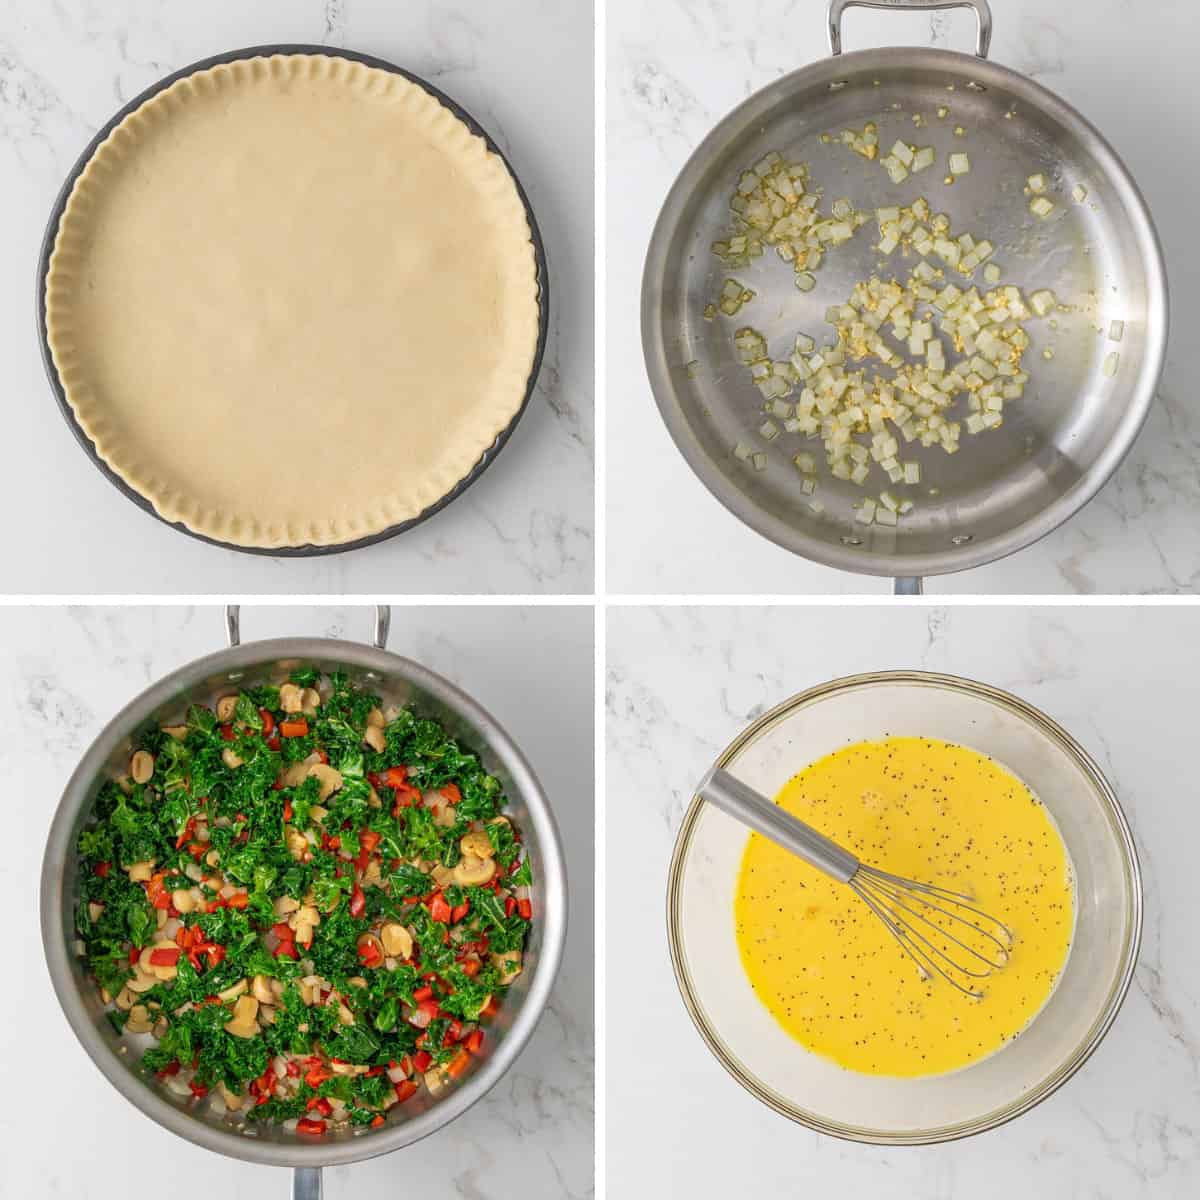 Step-by-step photos showing how to make kale quiche.